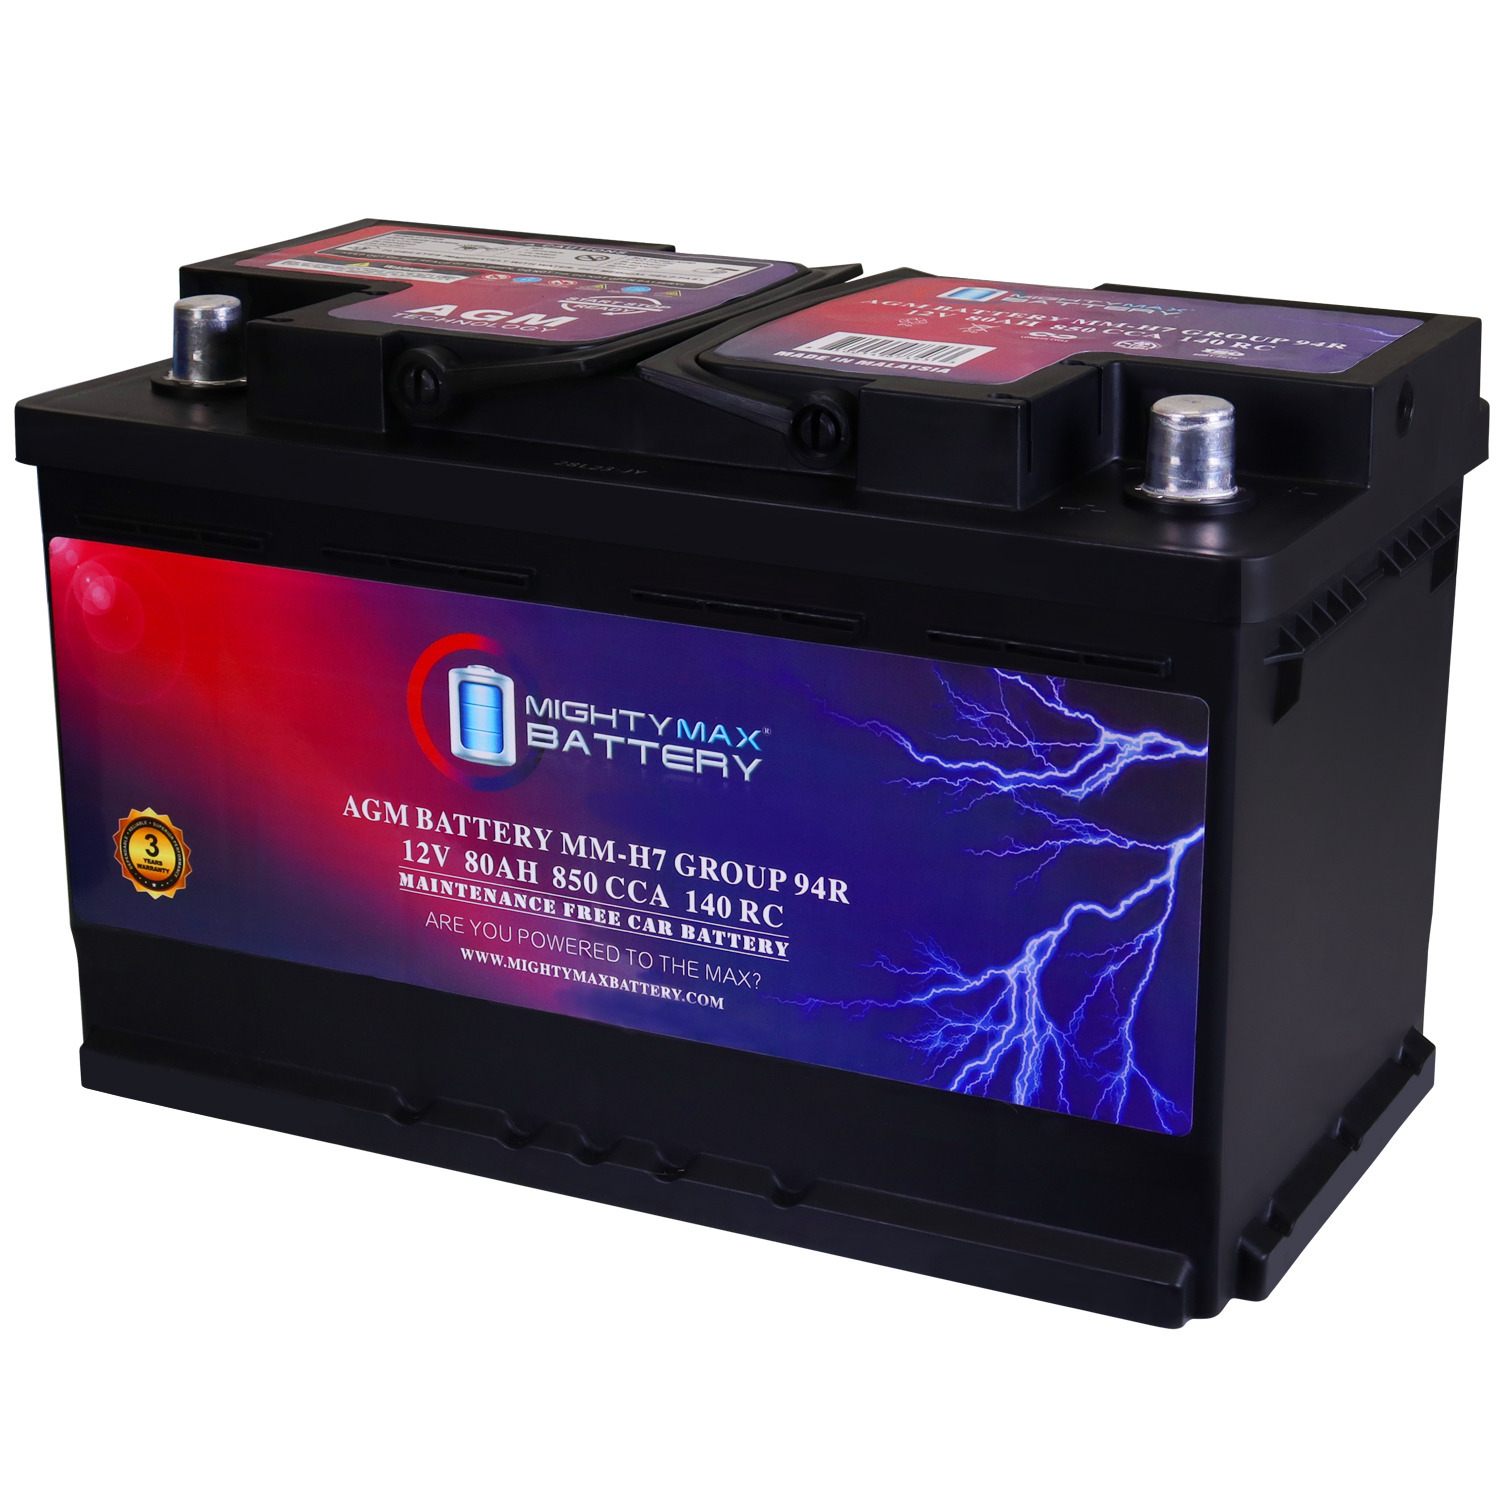 MM-H7 Group 94R 12V 80AH 140RC 850 CCA Replacement Battery Compatible with Jeep Grand Cherokee 05-10